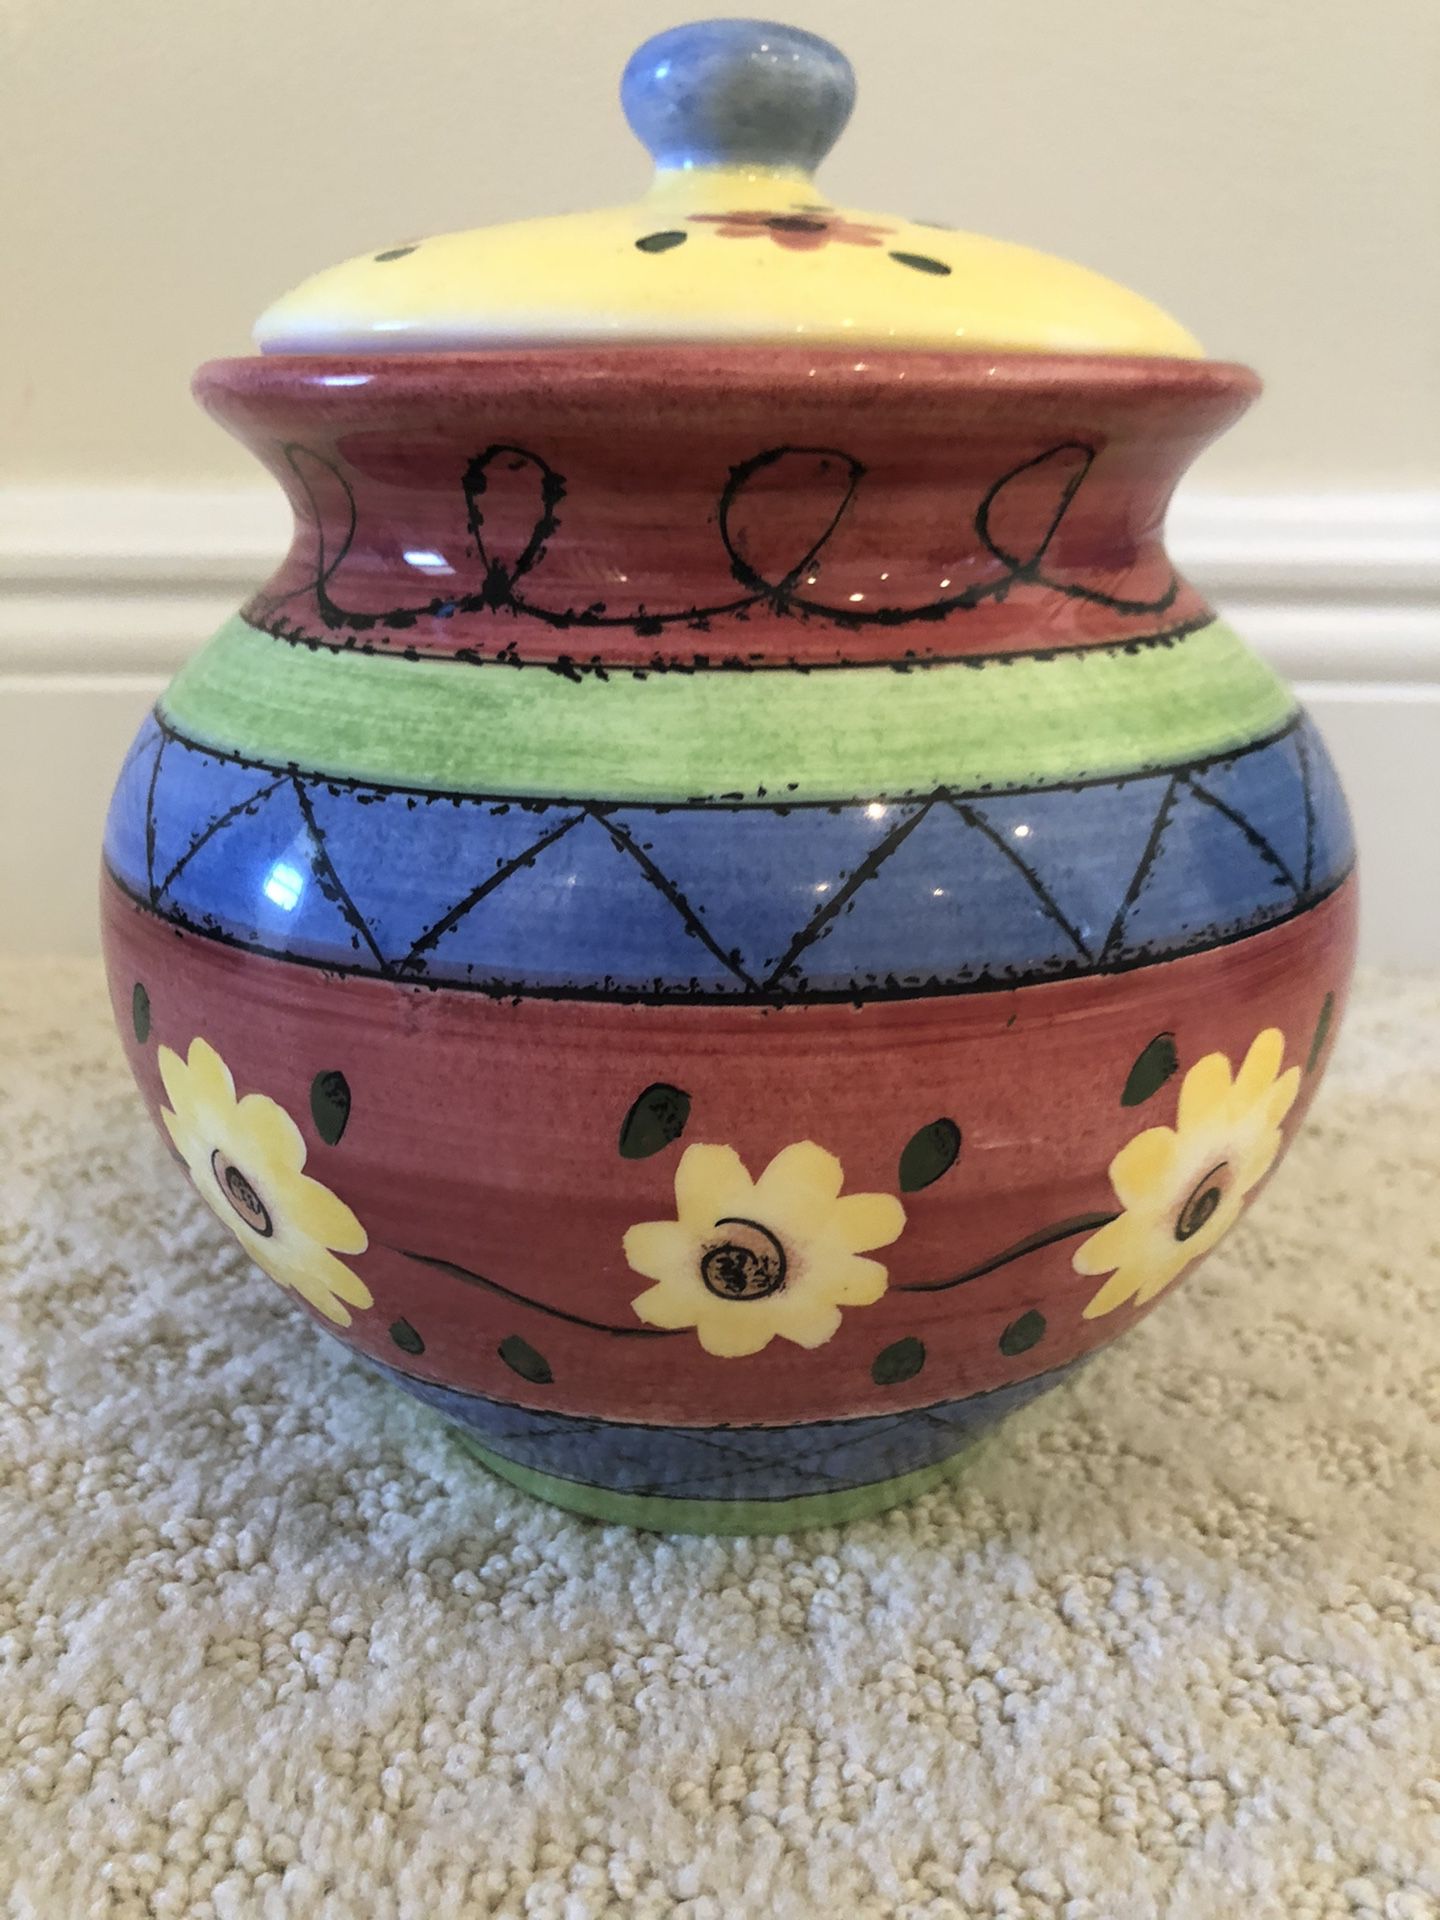 Decorative Jar / Bowl / Can be used as Planter